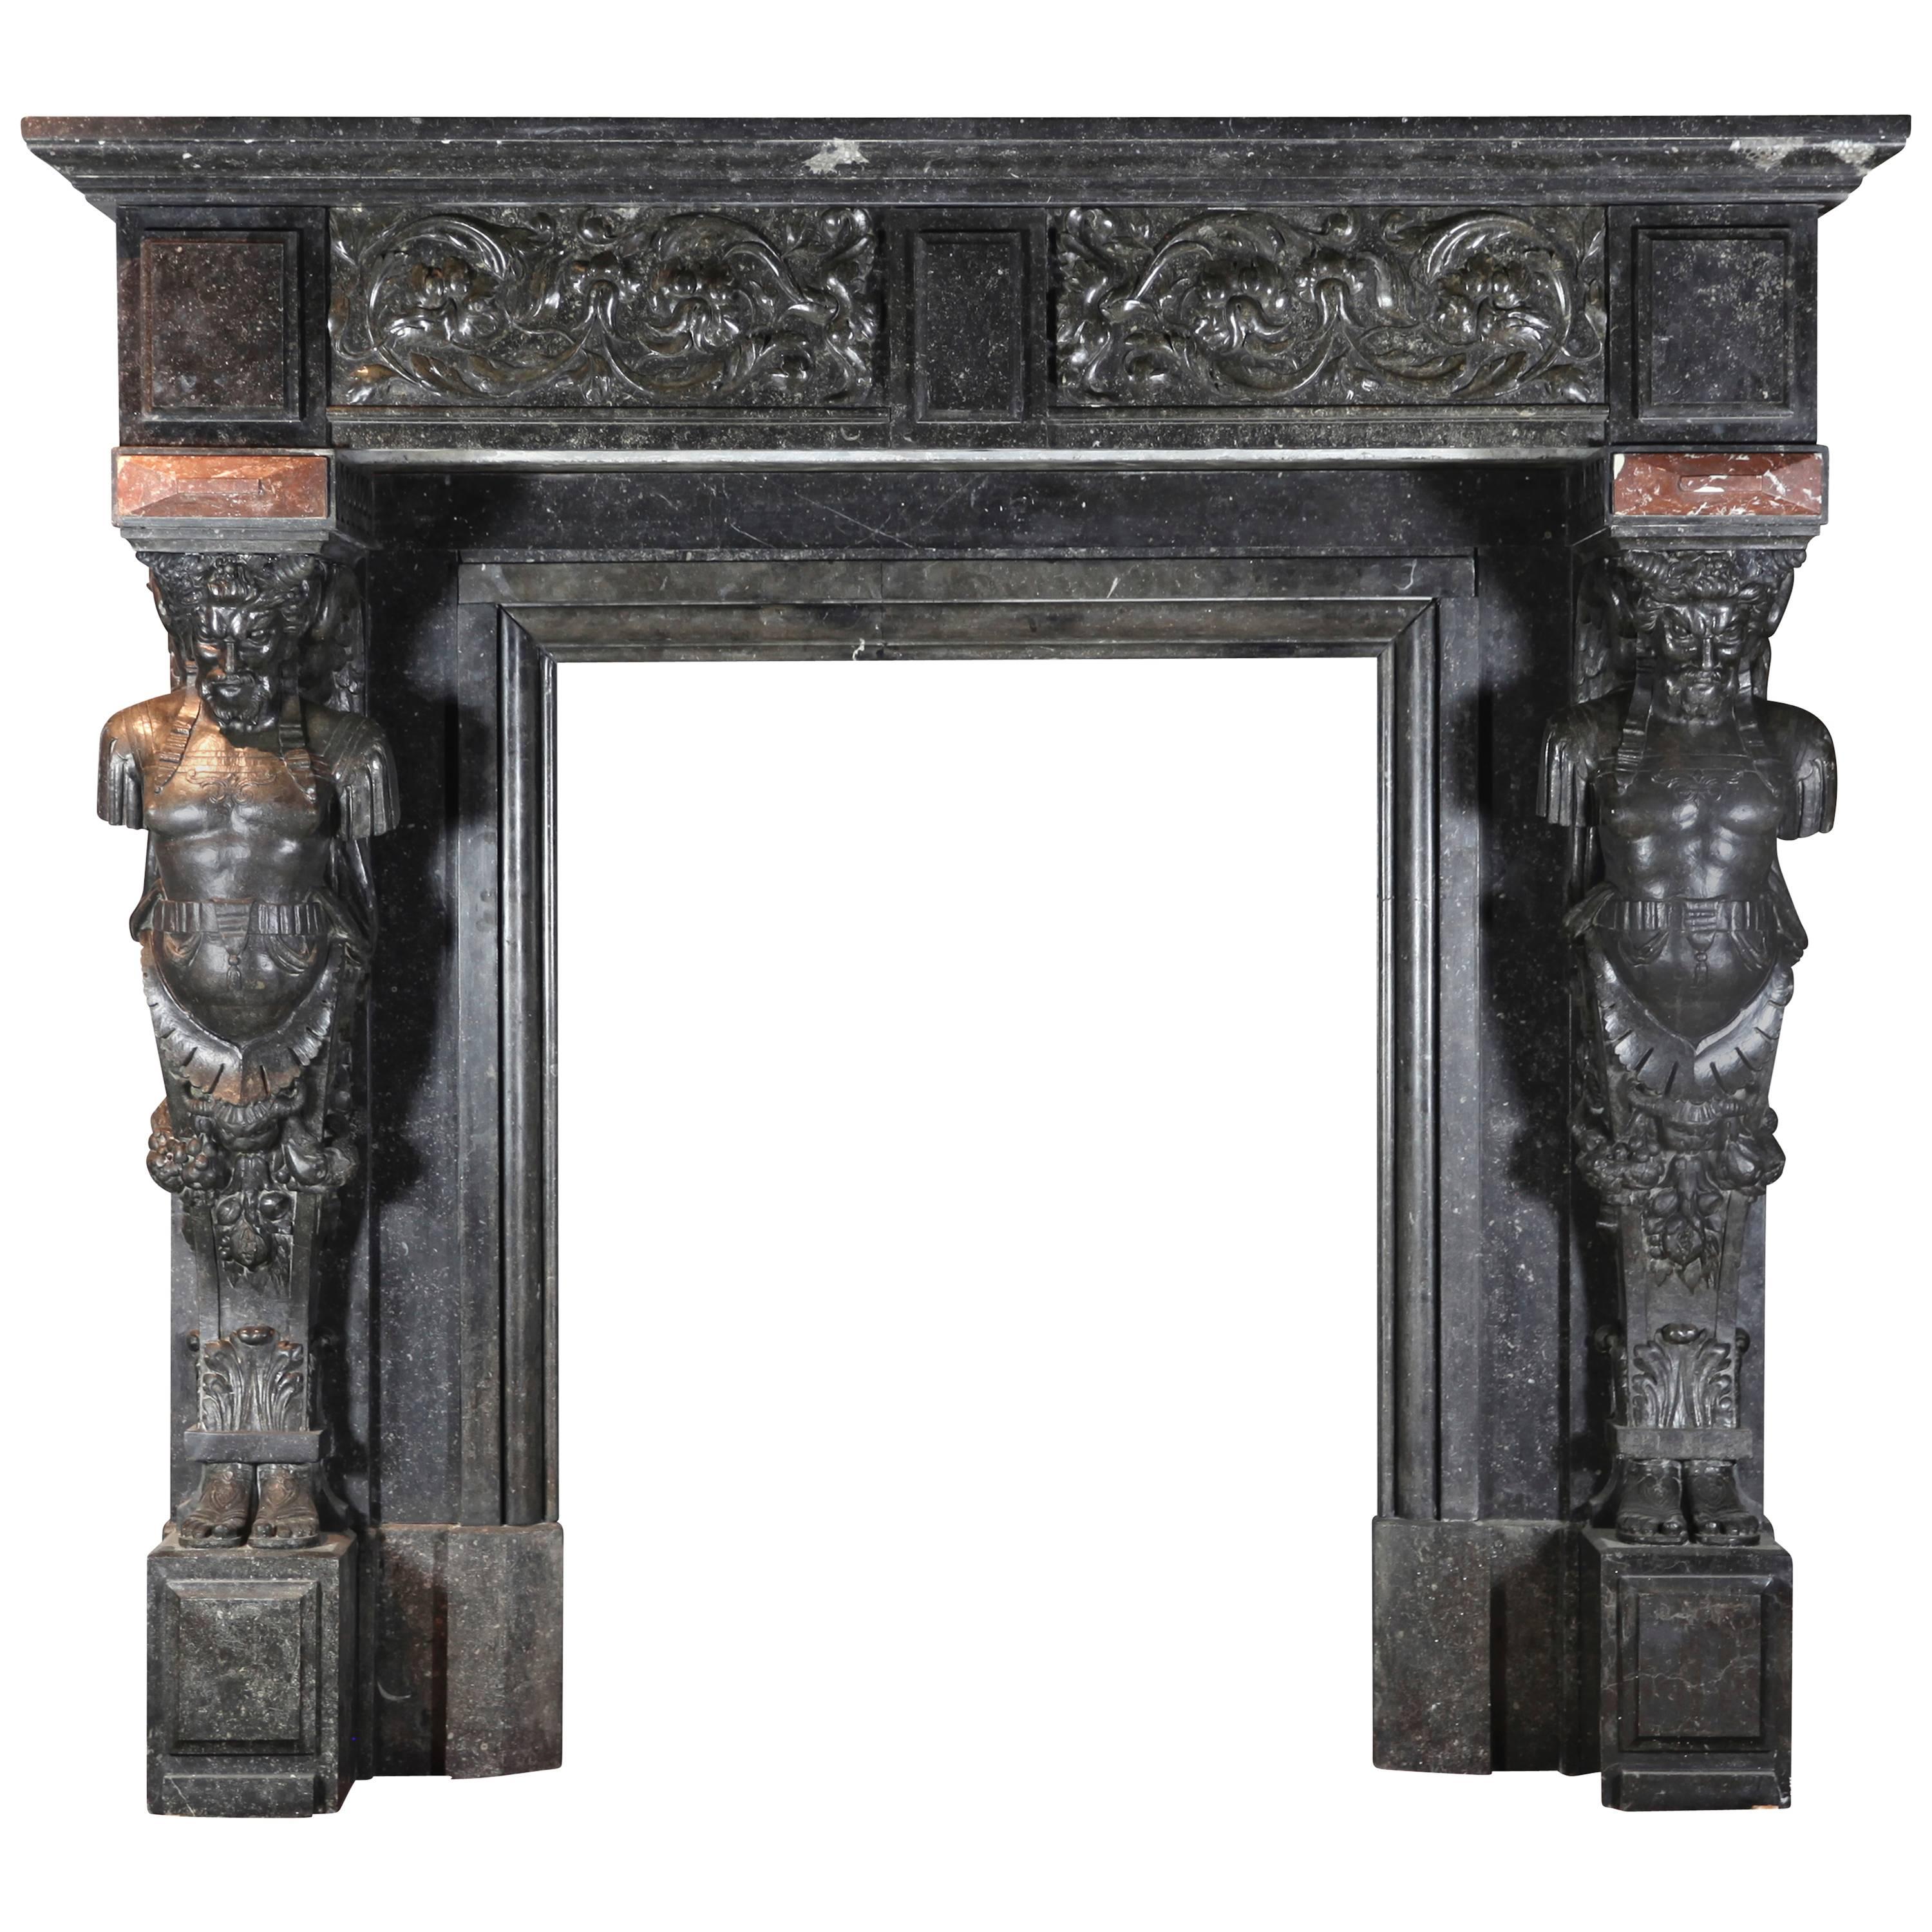 19th Century Belgian Antique Fireplace Mantel For Sale